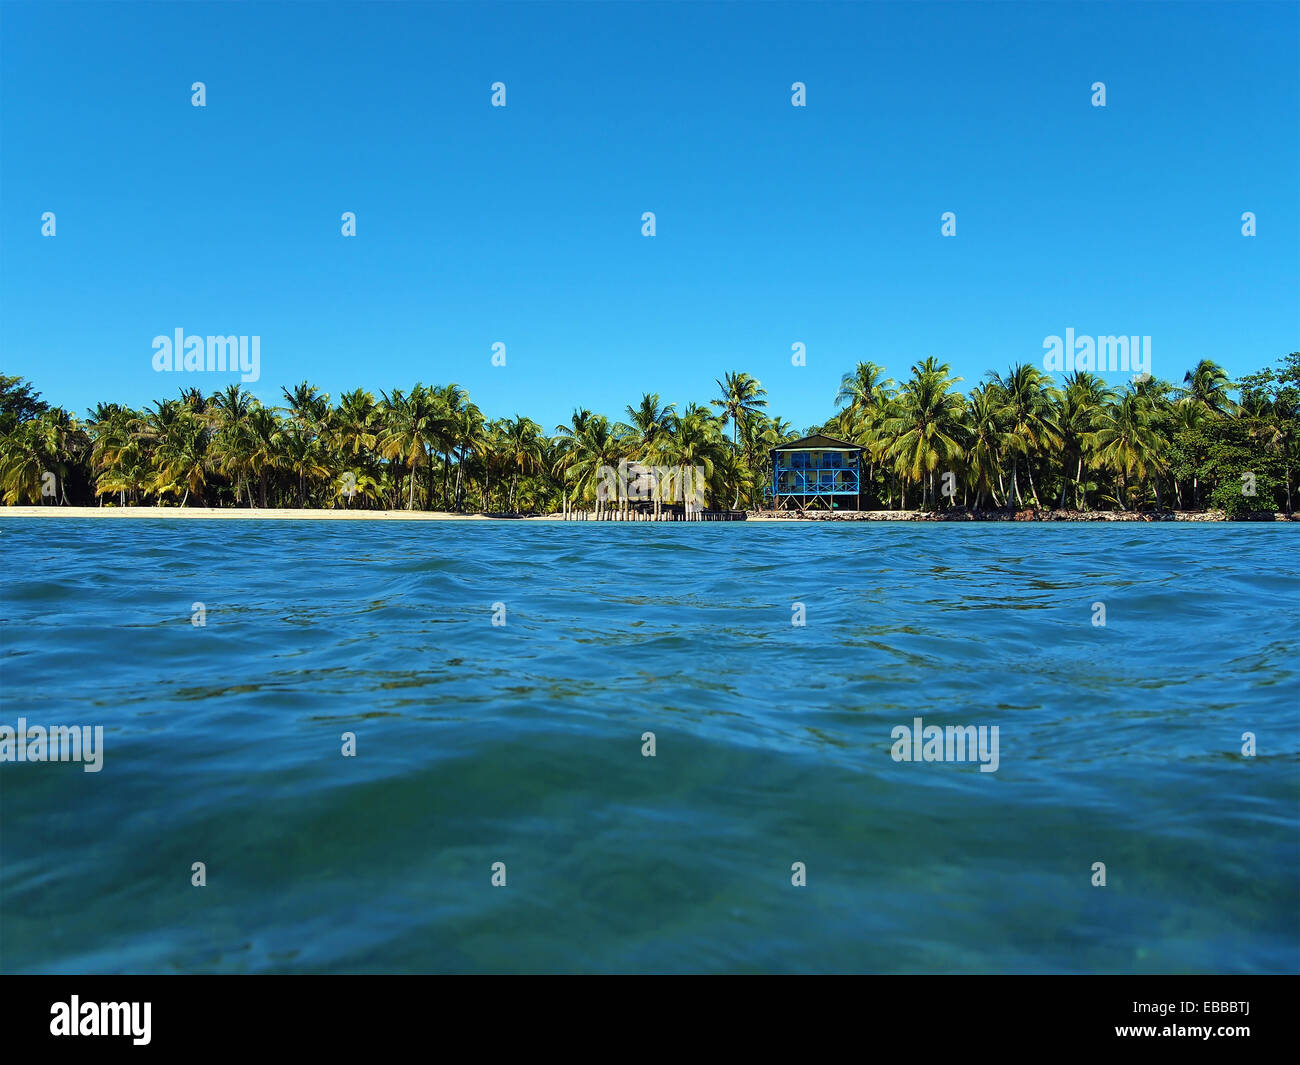 Tropical coast at the horizon with a beach house and coconut trees Stock Photo